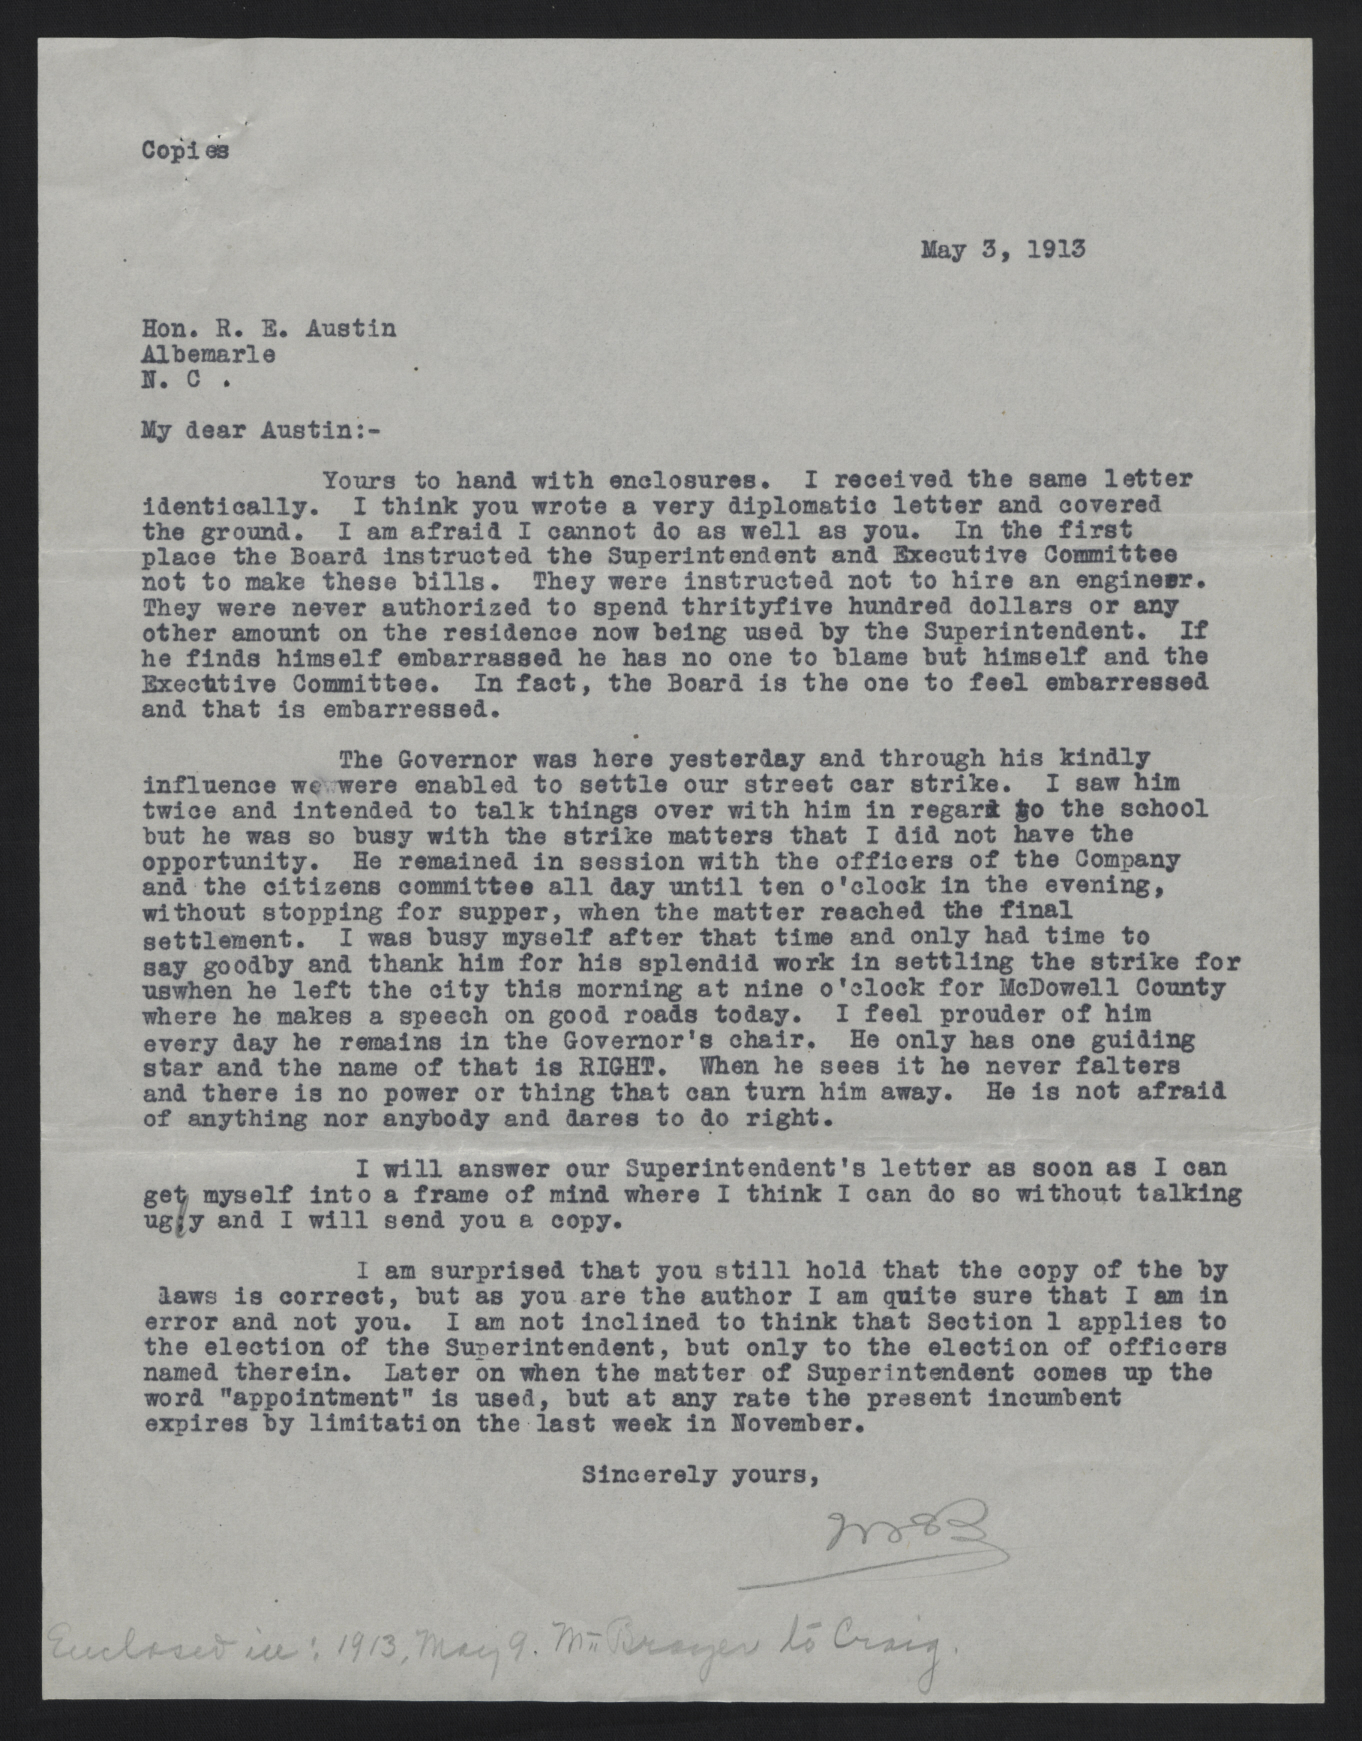 Letter from McBrayer to Austin, May 3, 1913